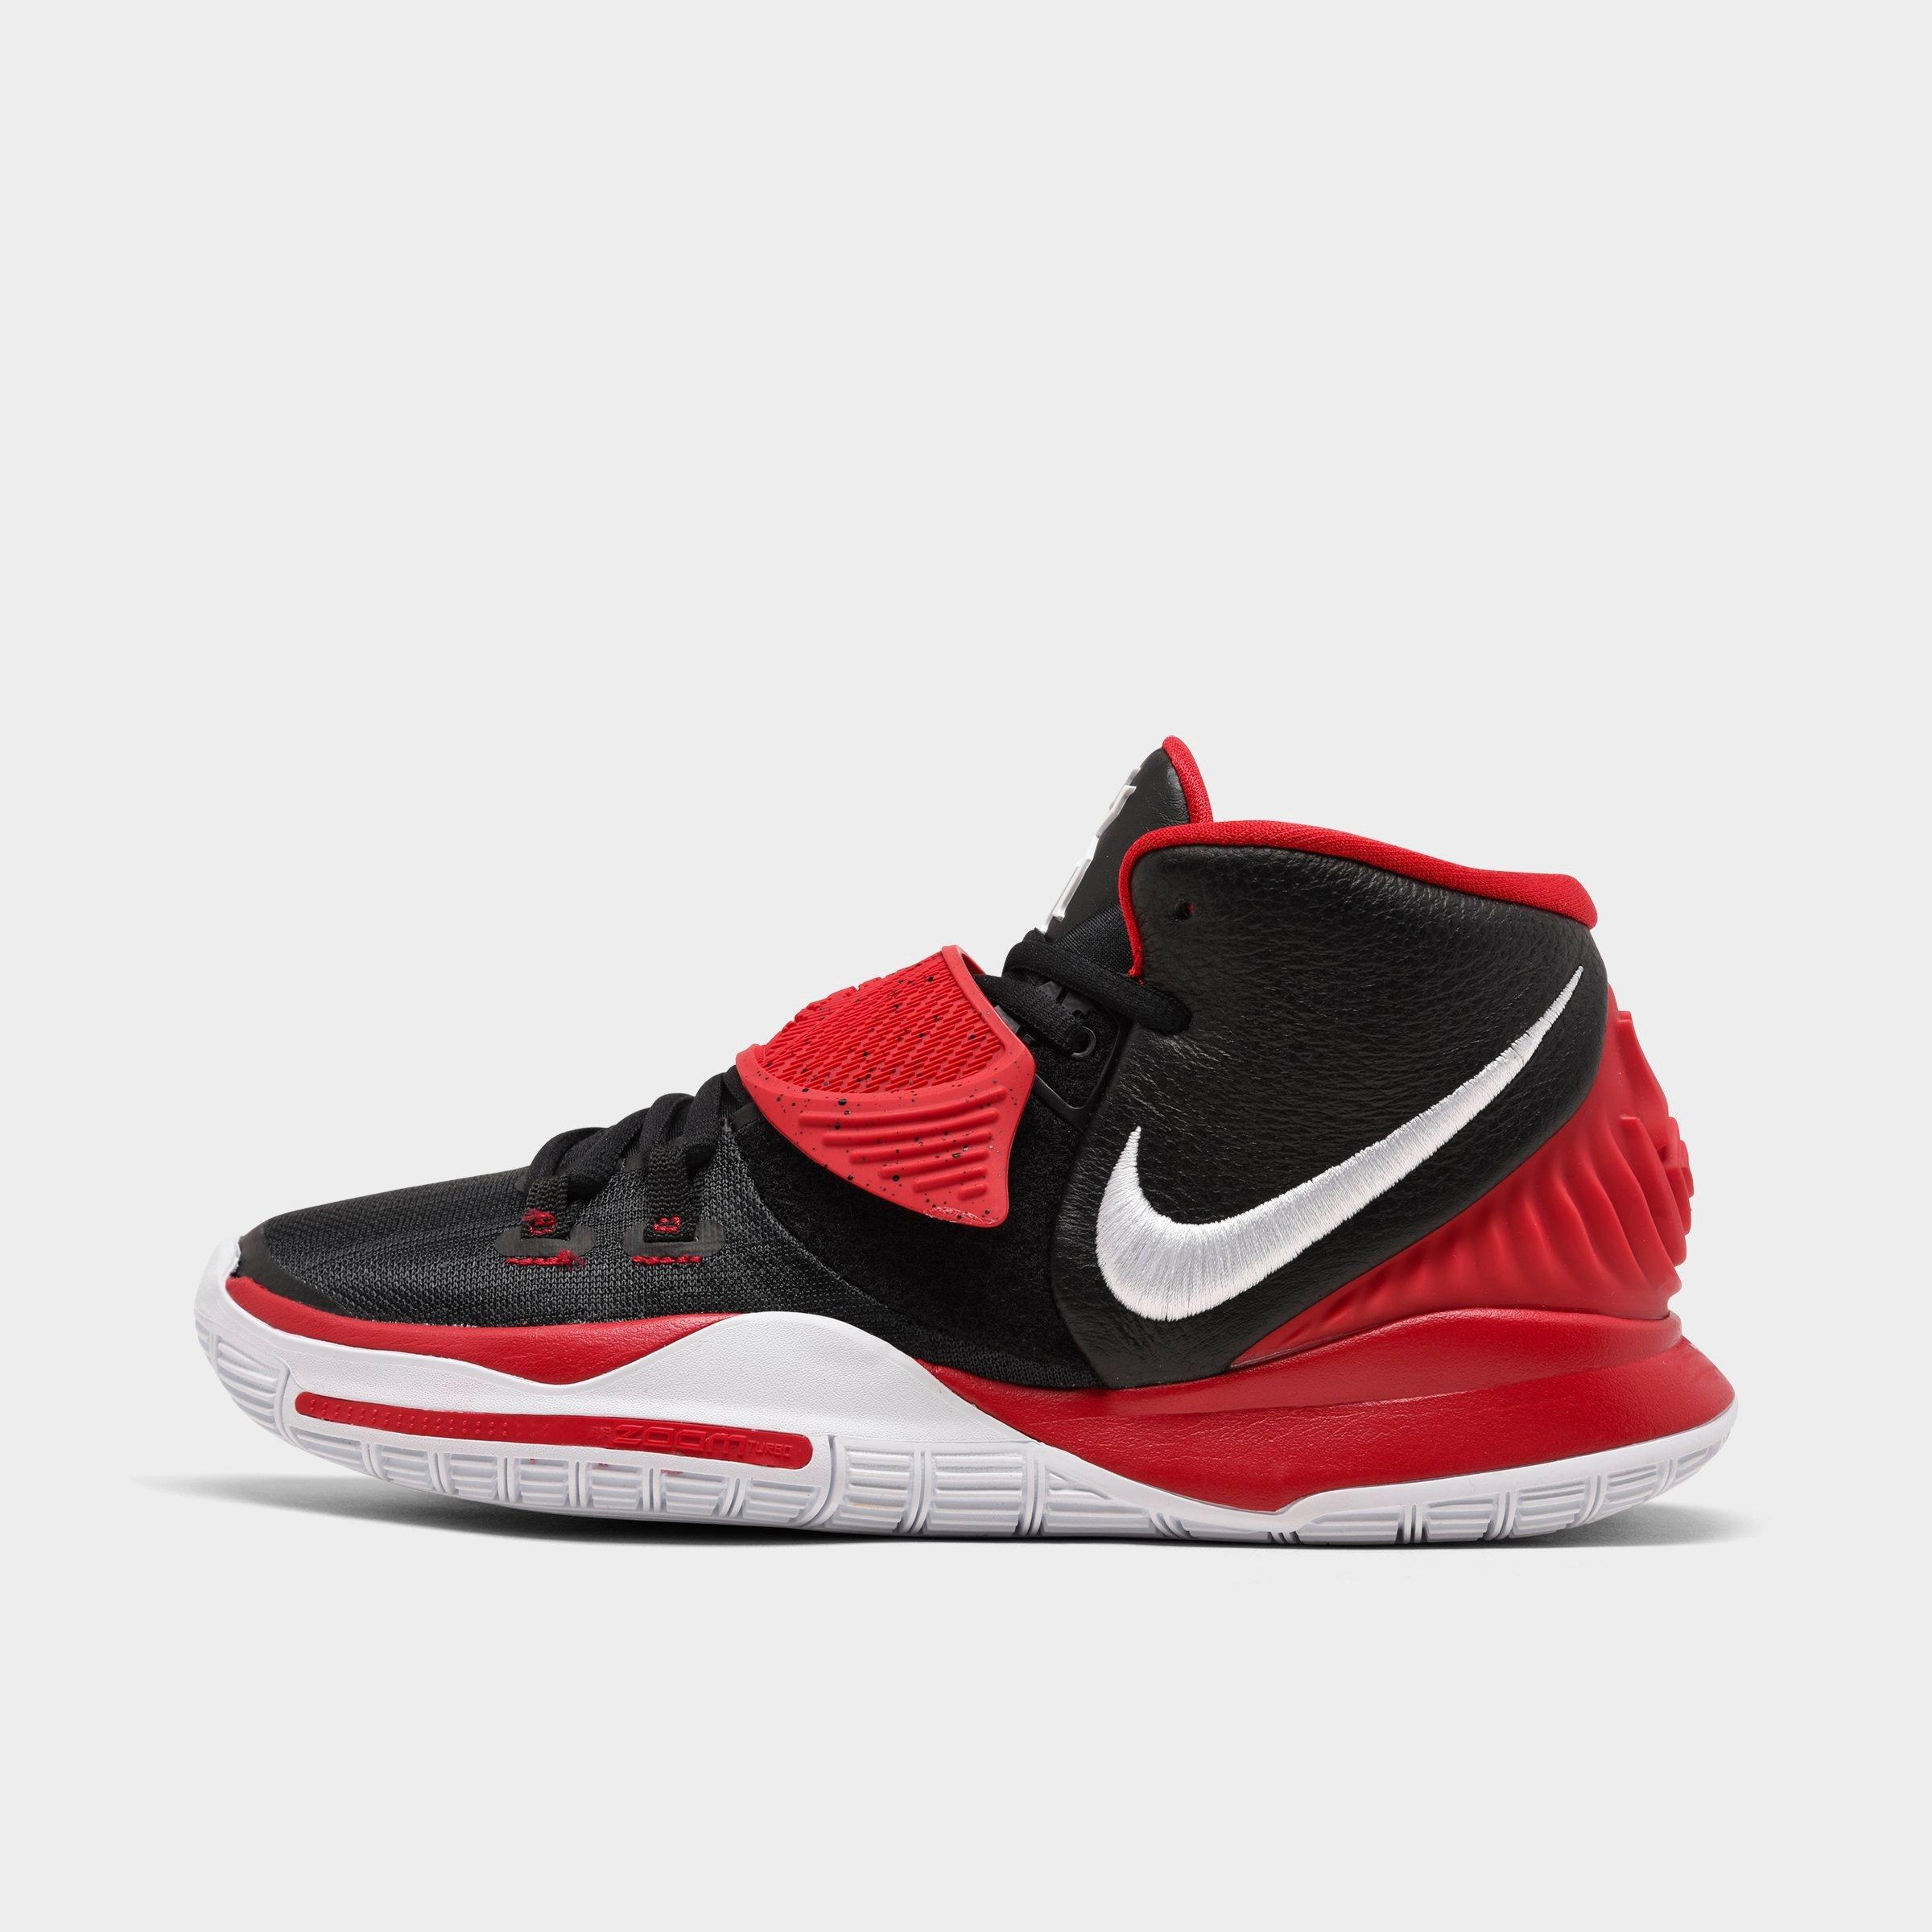 kyrie shoes online